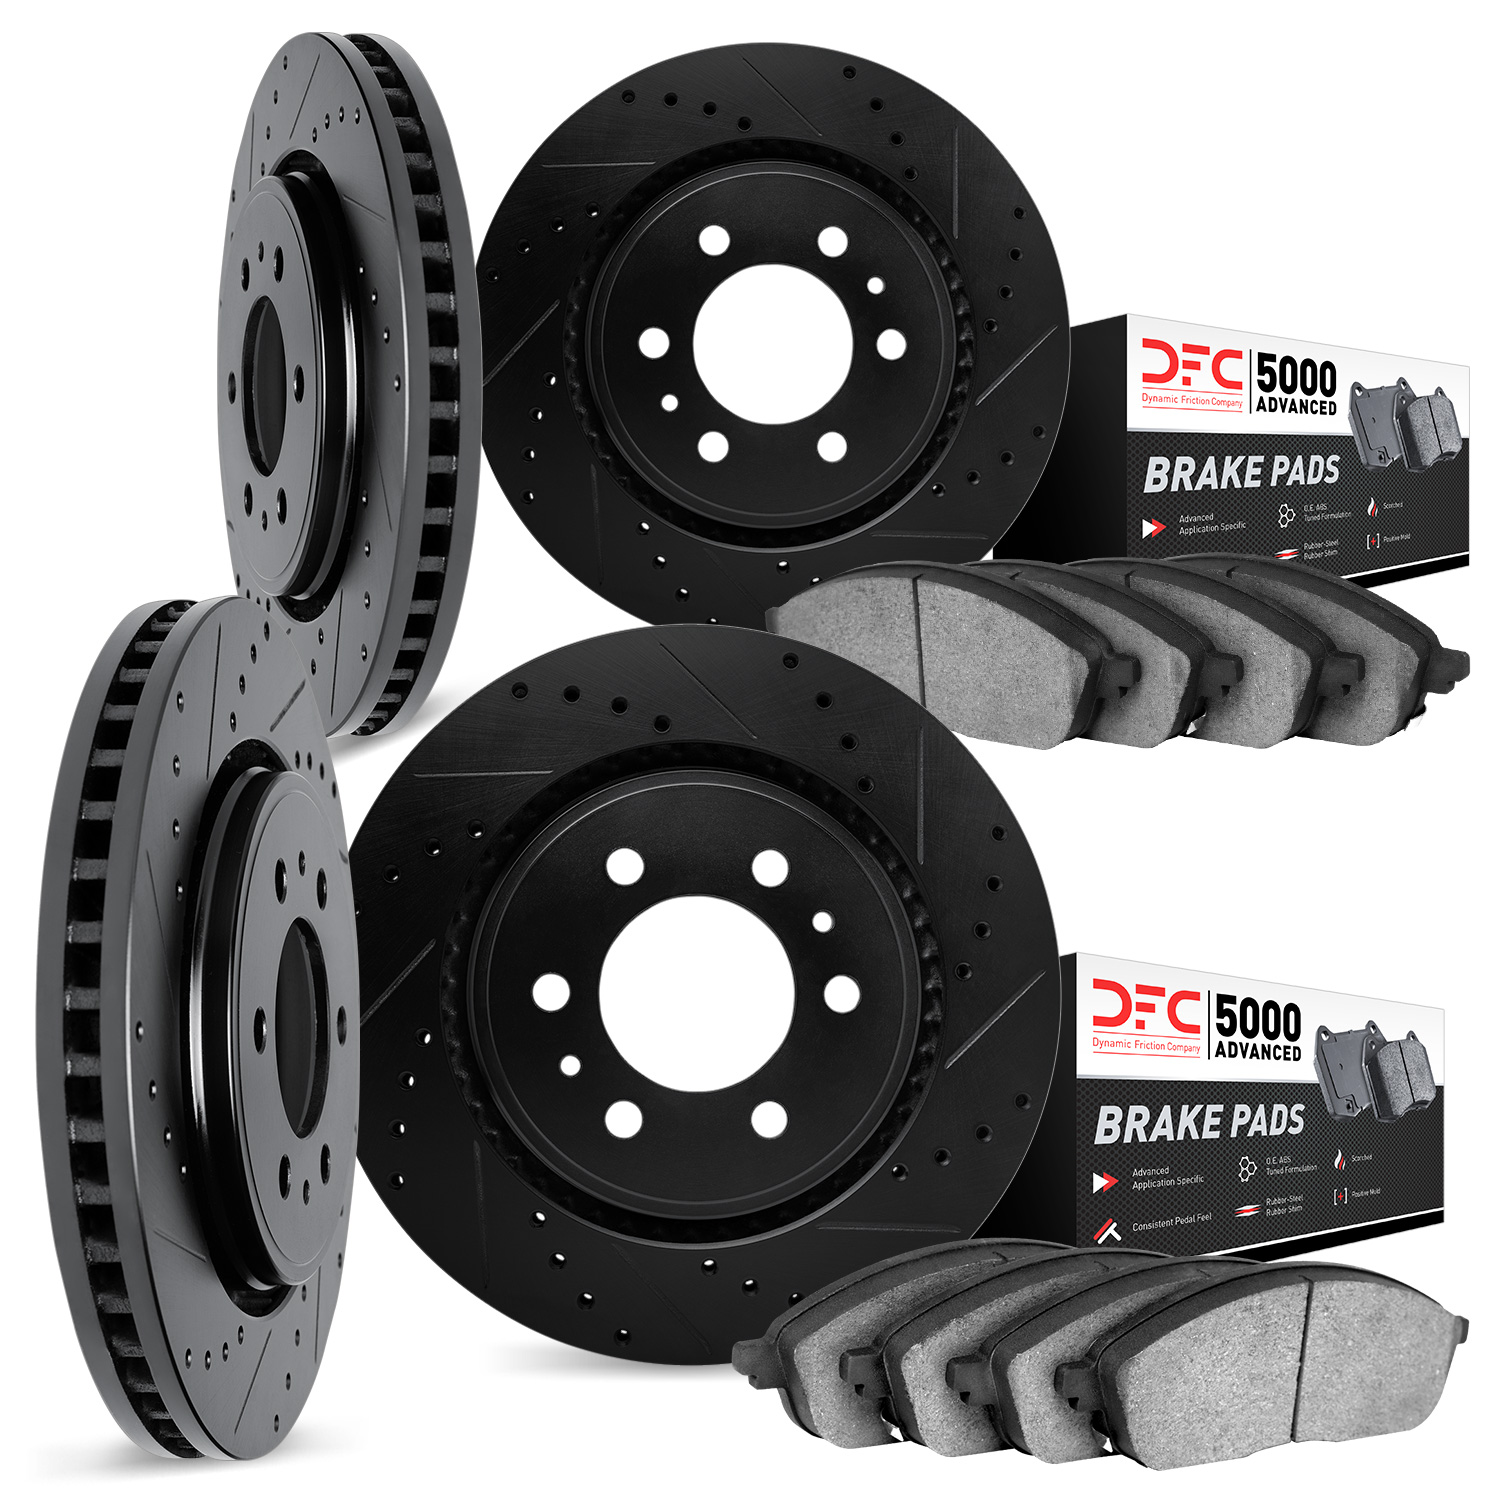 8504-46046 Drilled/Slotted Brake Rotors w/5000 Advanced Brake Pads Kit [Black], 2010-2016 GM, Position: Front and Rear